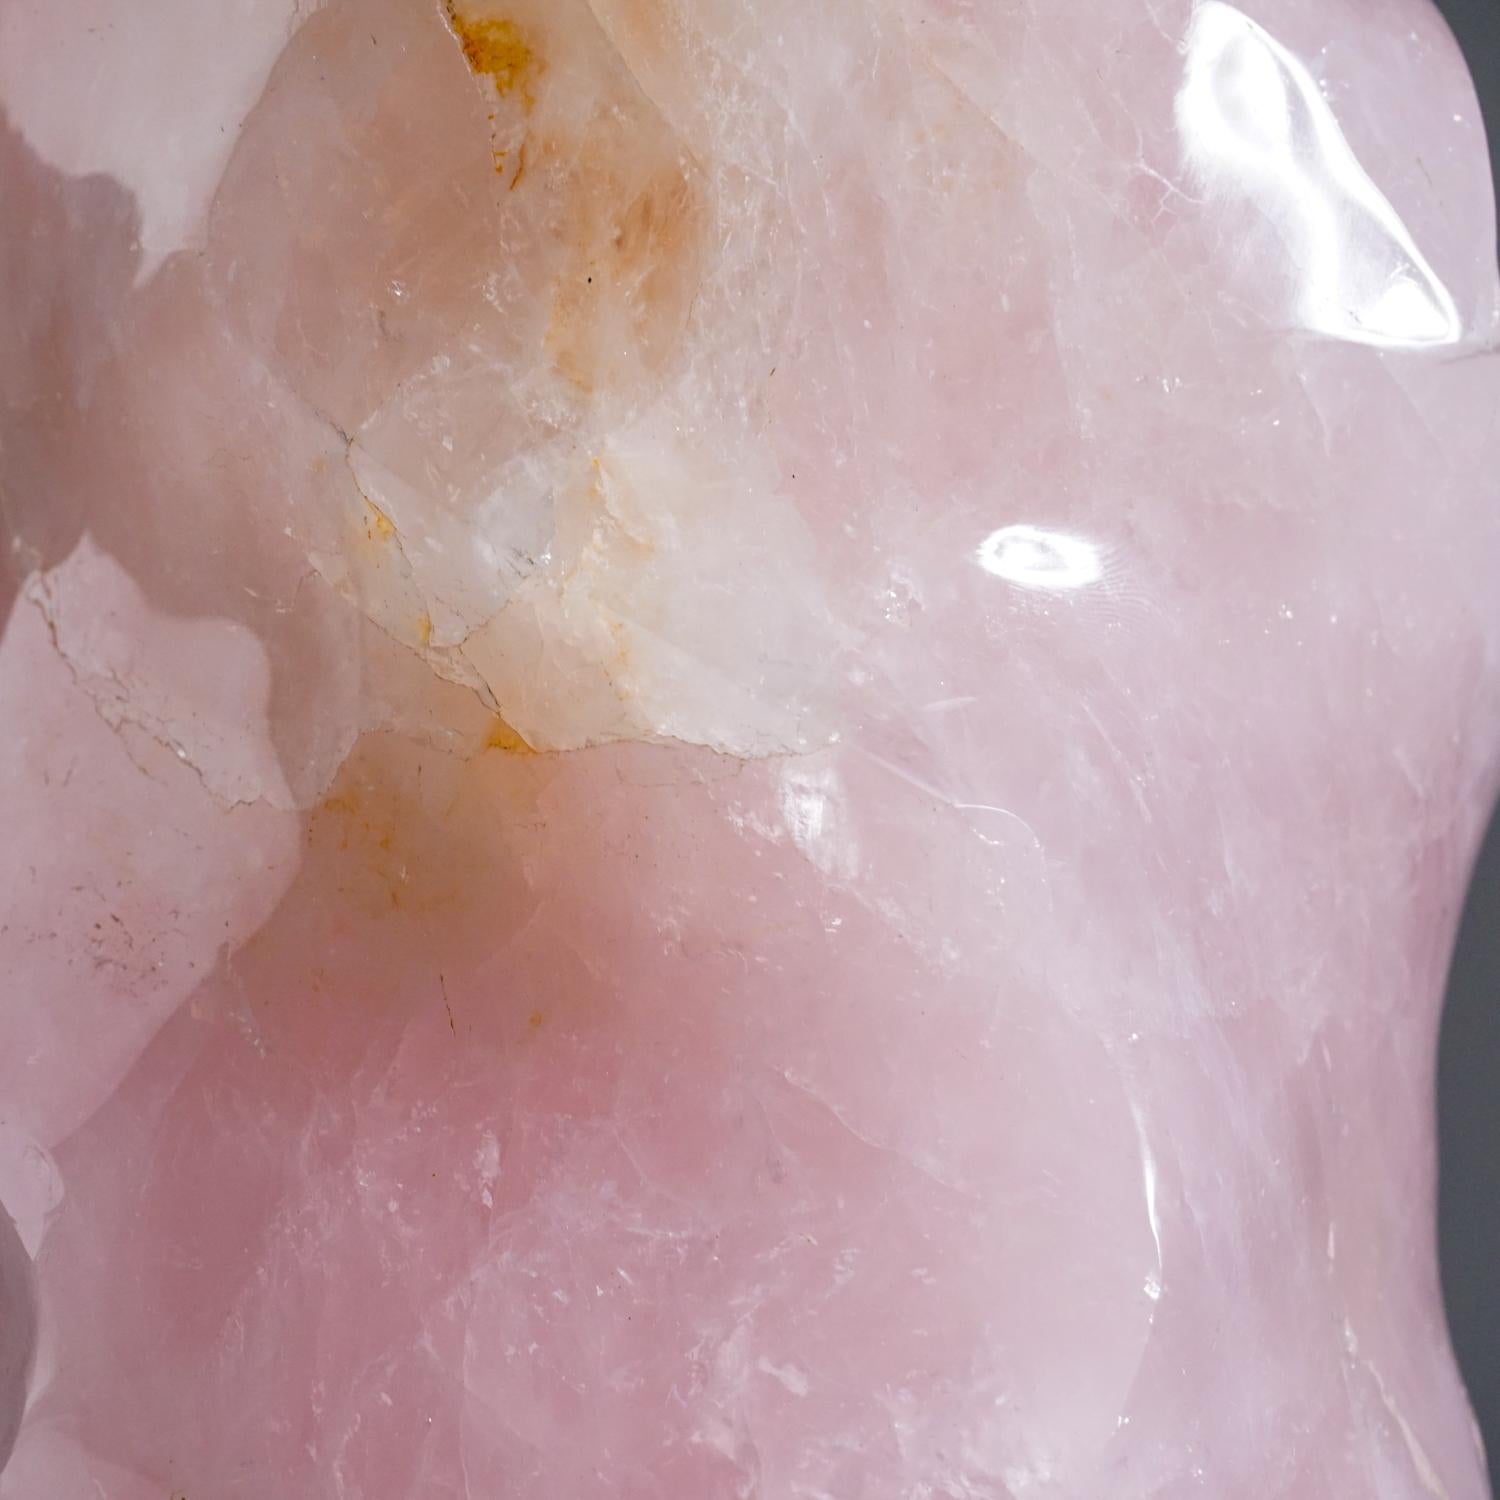 AAA quality, hand-polished flame free-form of natural gem translucent rose quartz from Brazil. This specimen has bright rich color, all sides hand polished to a smooth mirror finish.

Rose Quartz is the stone of unconditional love. One of the most